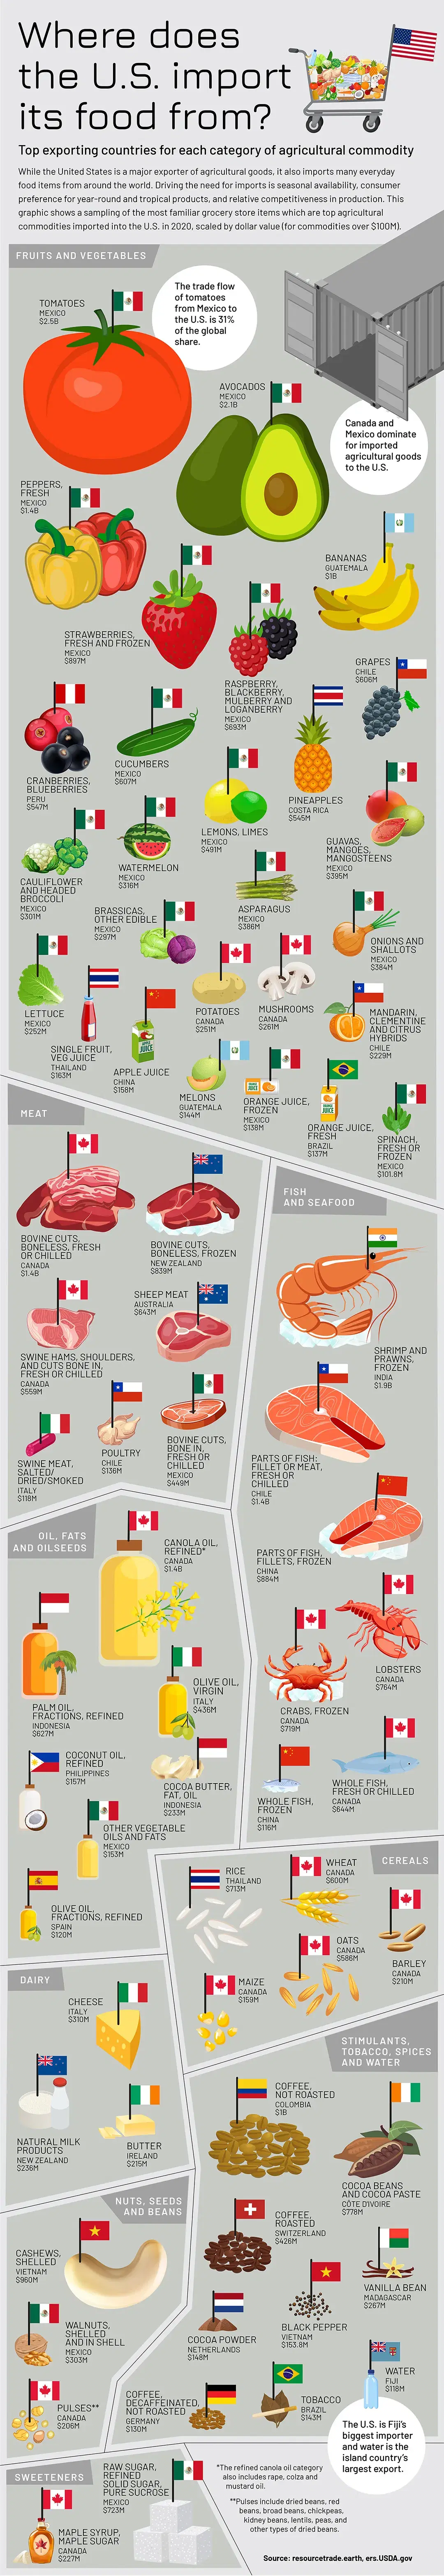 Top U.S. Food Imports by Origin Country